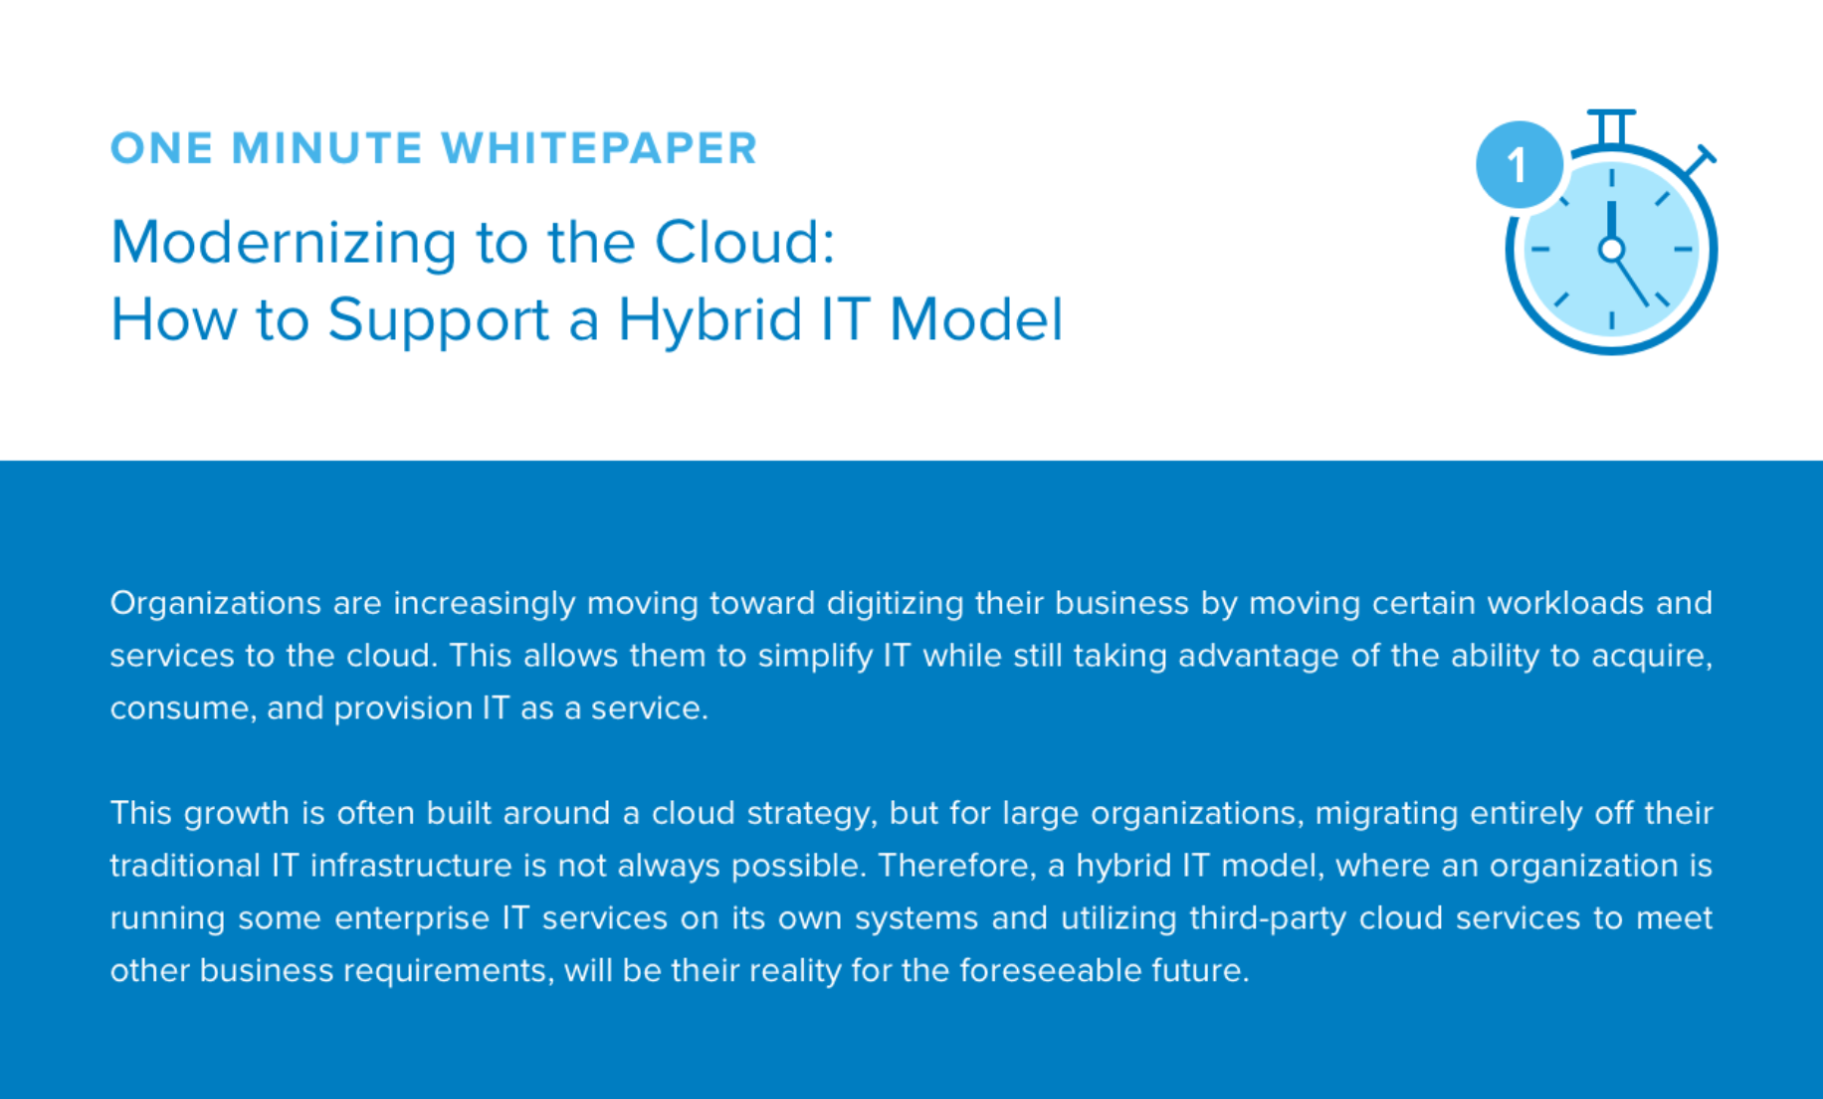 Modernizing the cloud to support a hybrid IT model.